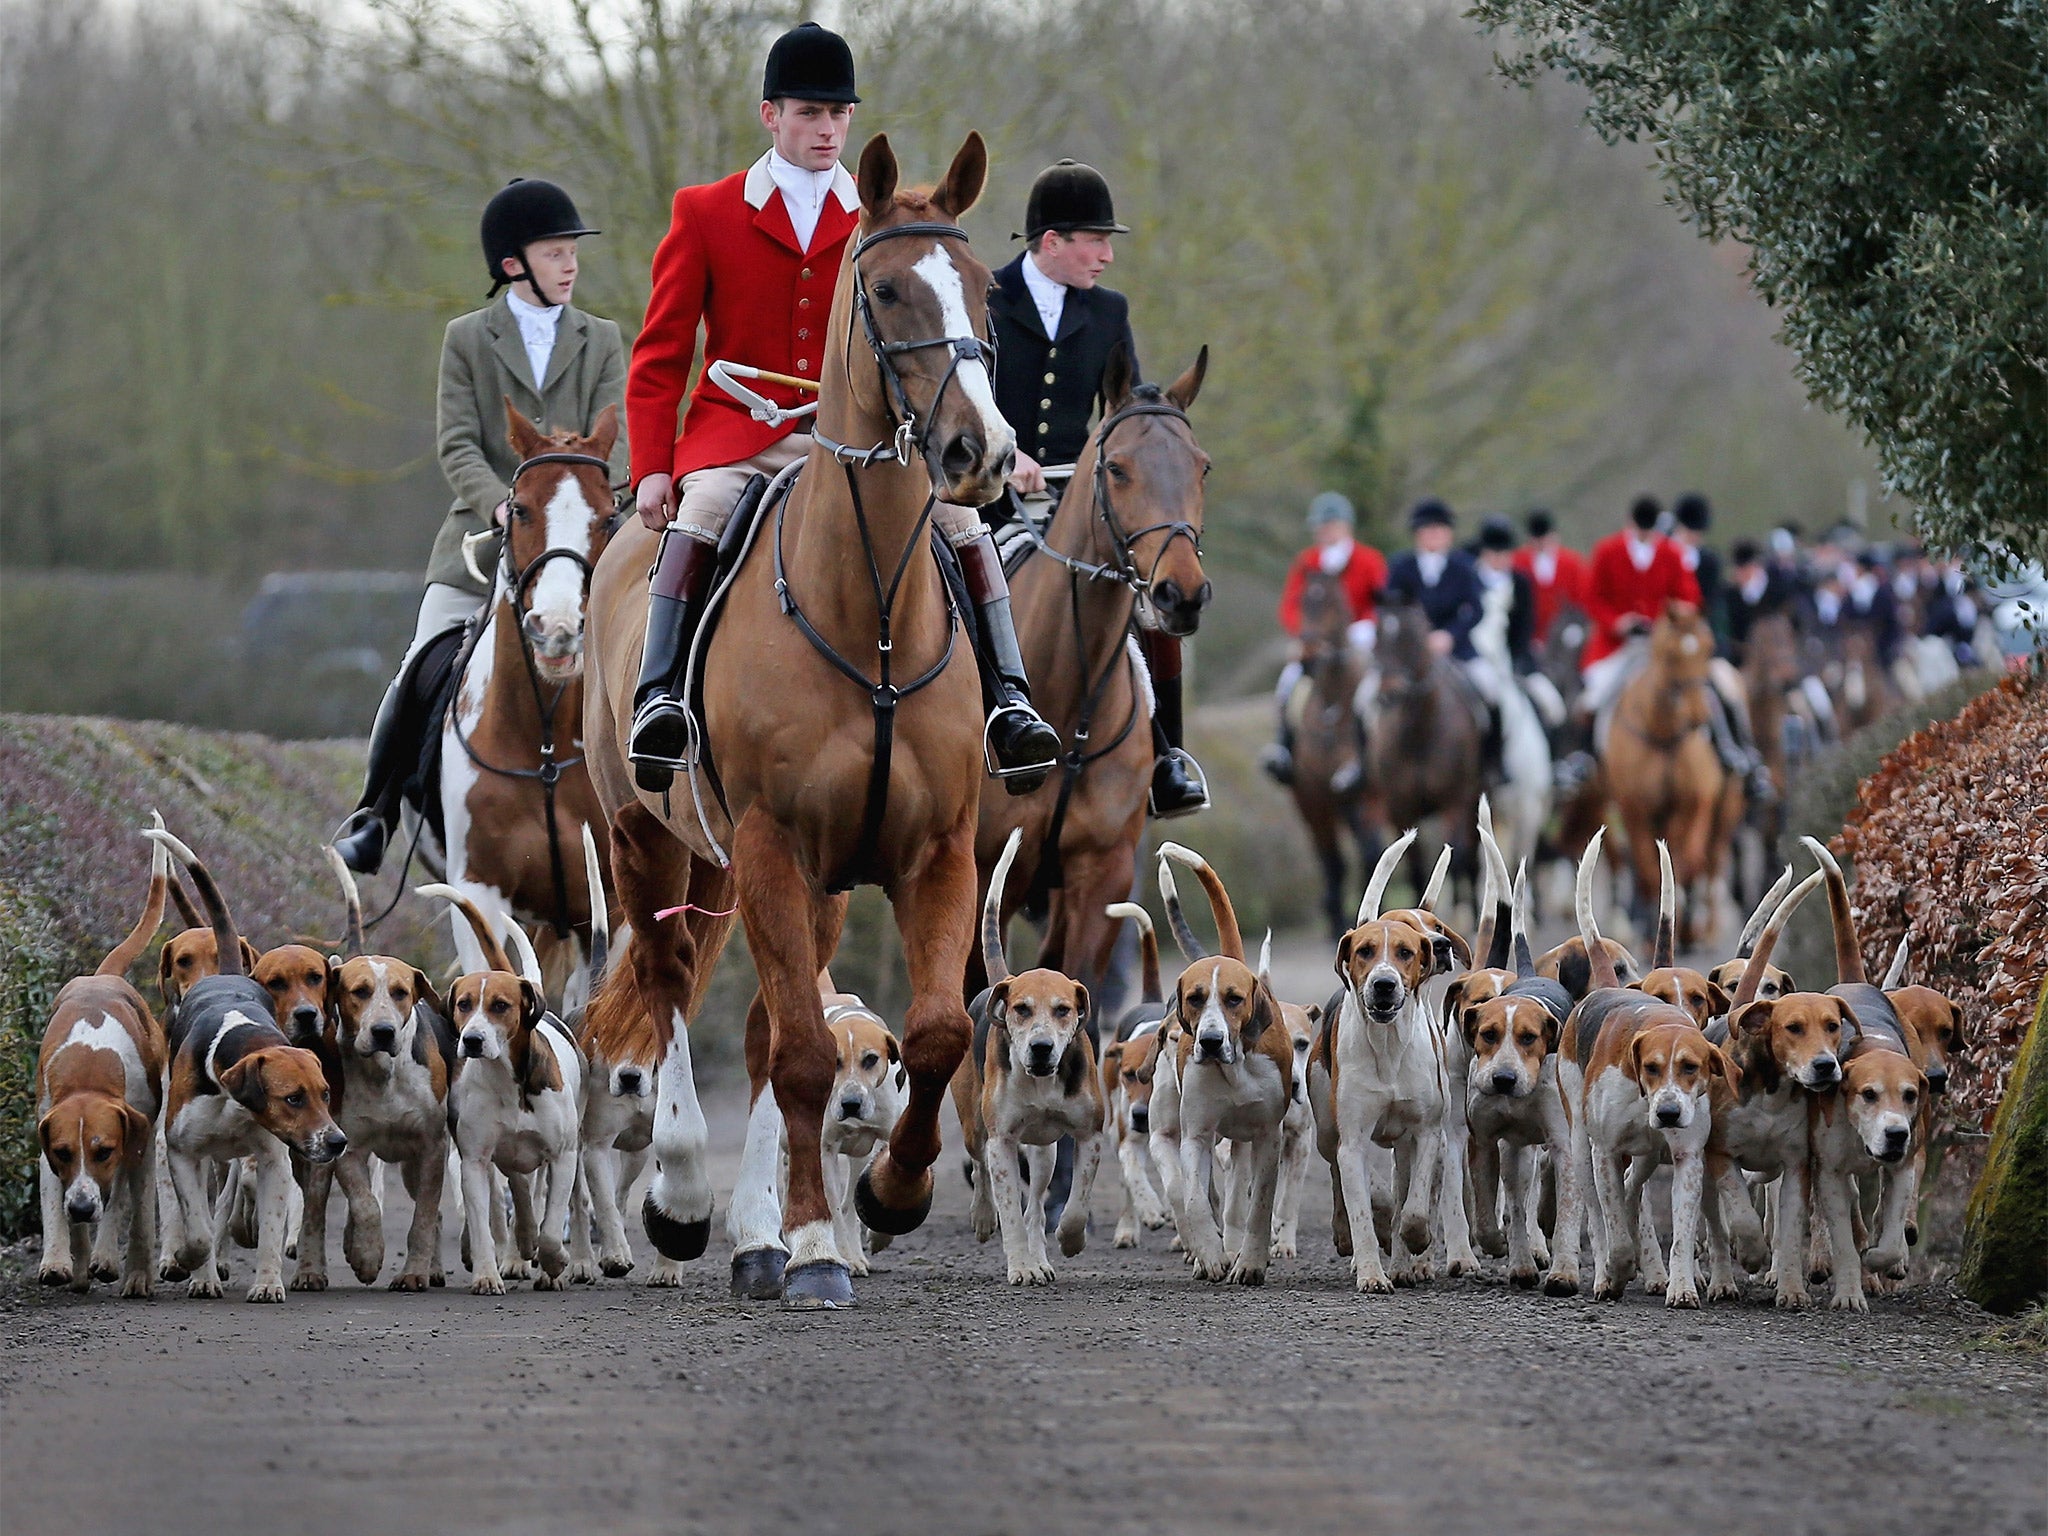 The hounds of the Atherstone Hunt, led by Hunstman Stuart Barton, set off on 5 March this year in Bosworth